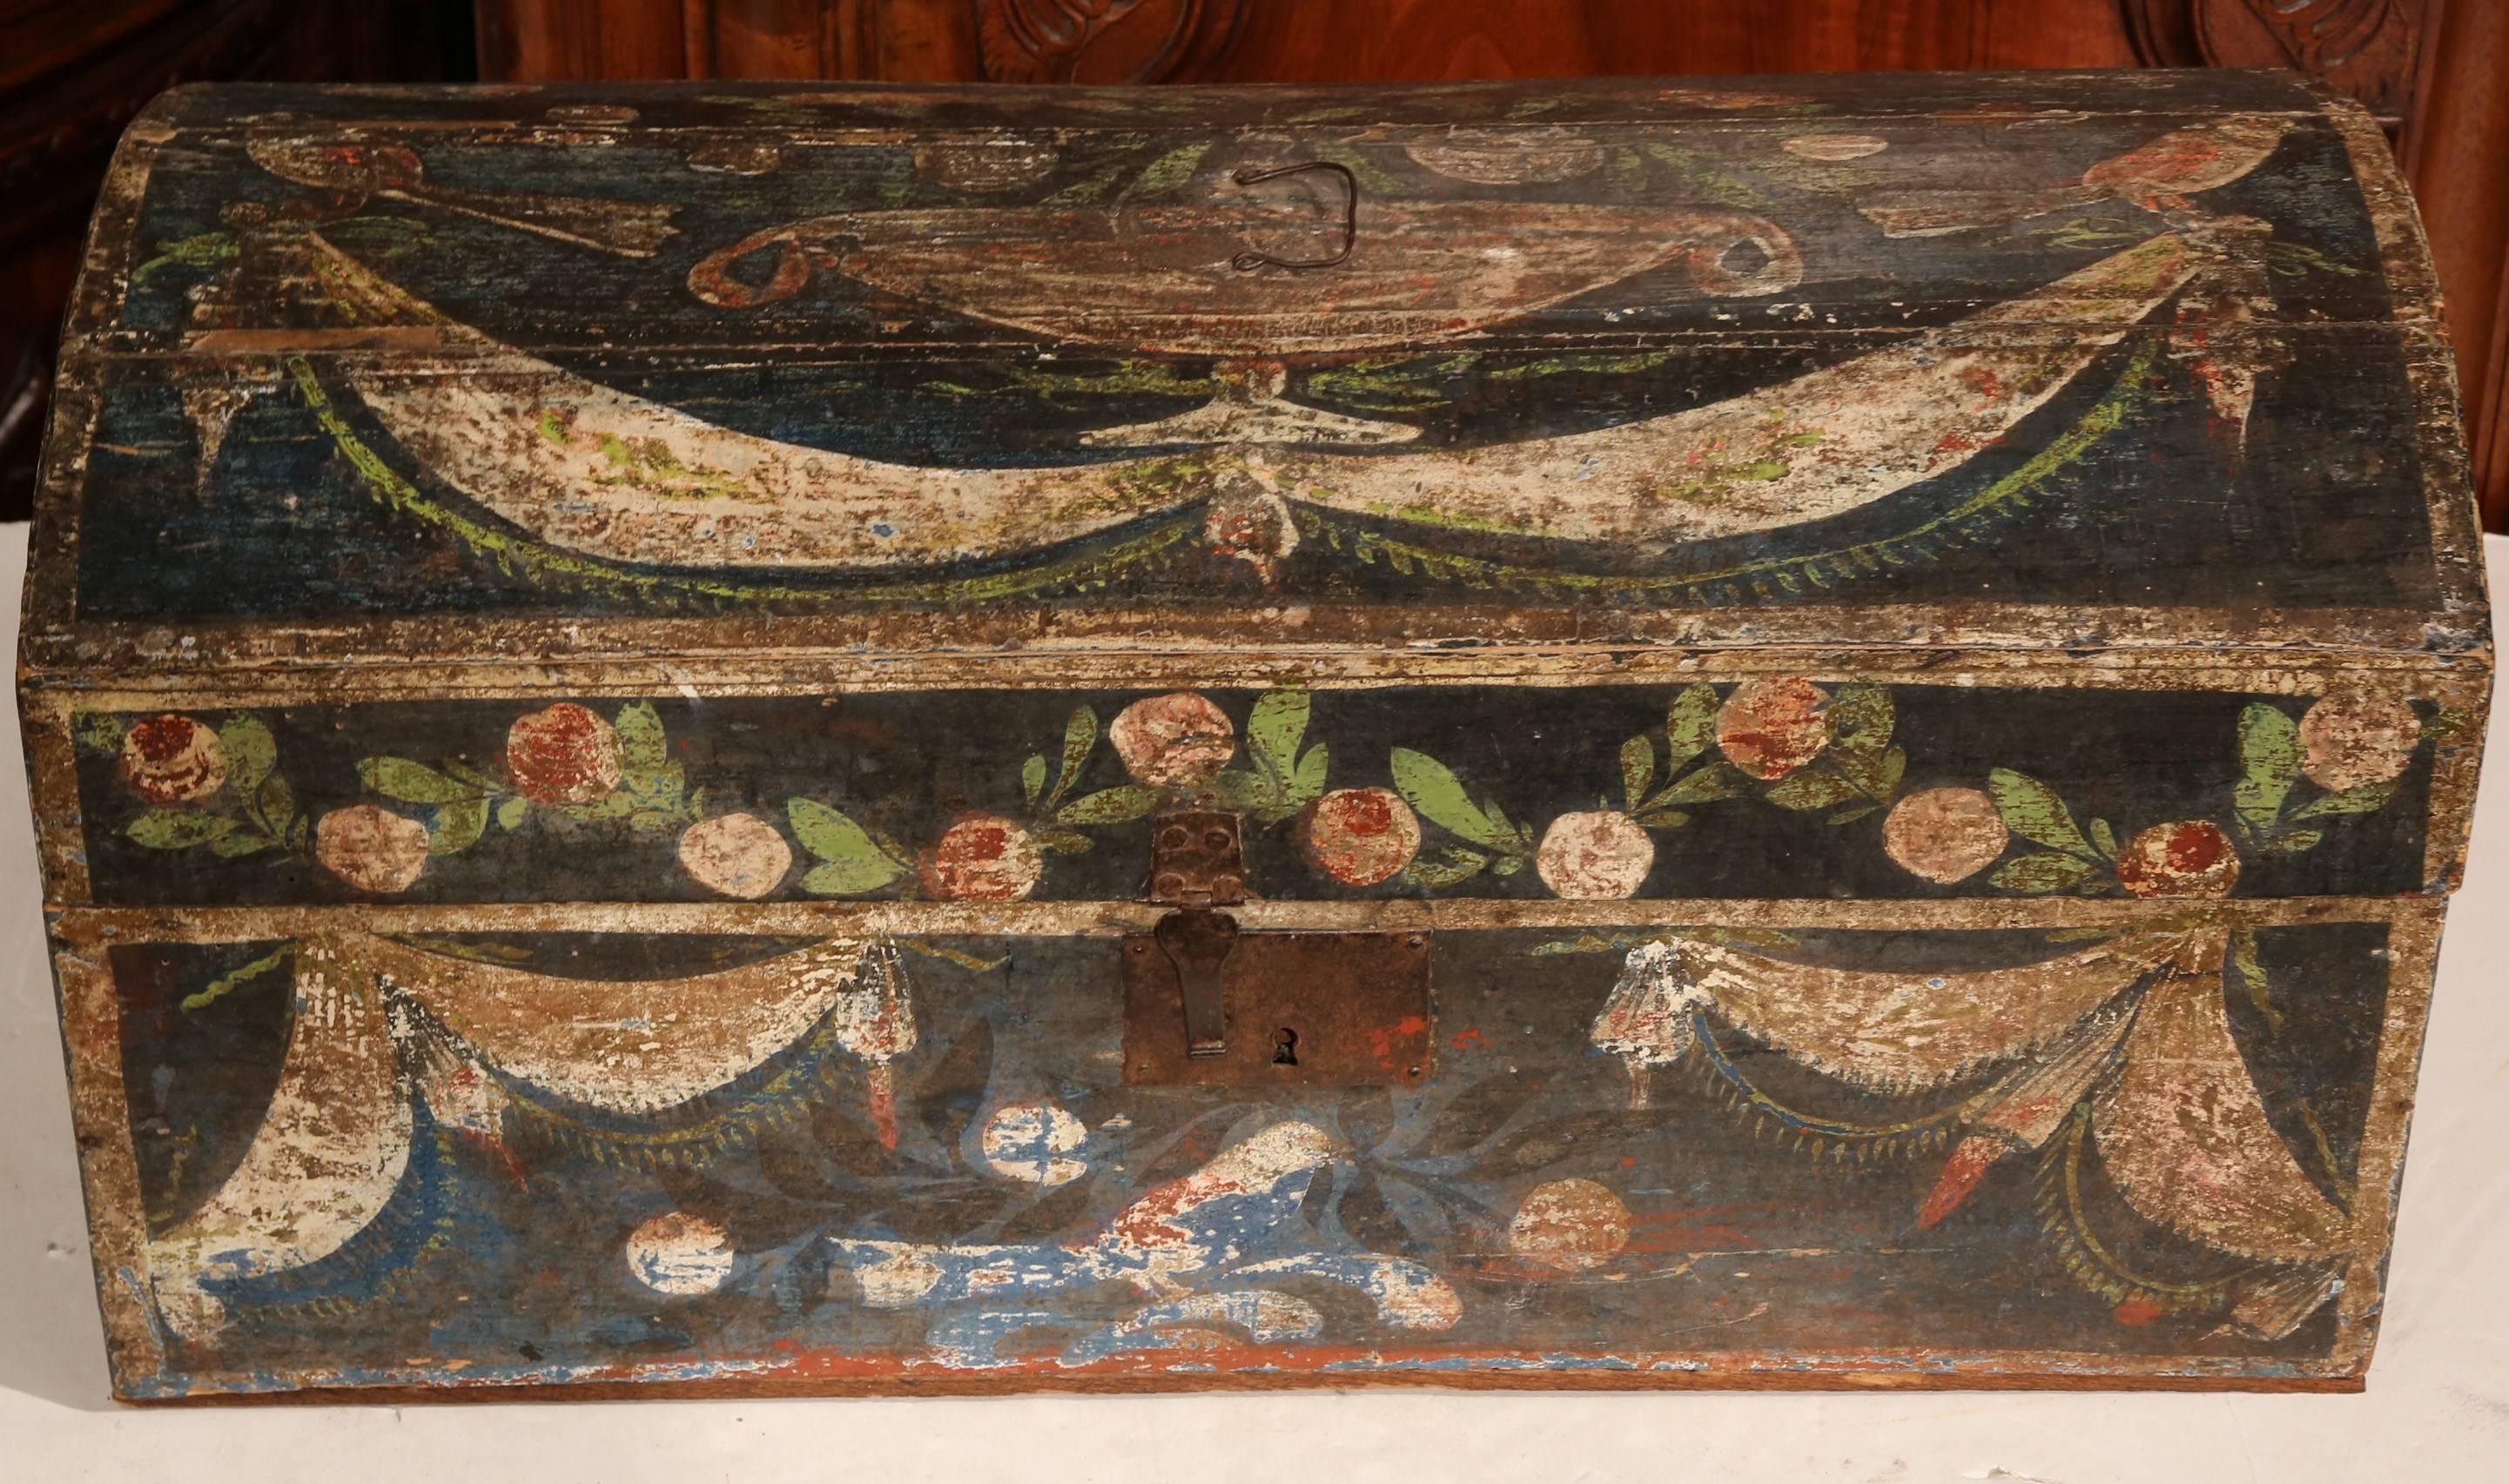 This colorful, hand-painted wedding trunk was crafted in Northern France, circa 1780. The antique box has a beautiful, original, painted exterior and is decorated with five painted birds, a vase, garlands, flowers and leaves. Excellent condition